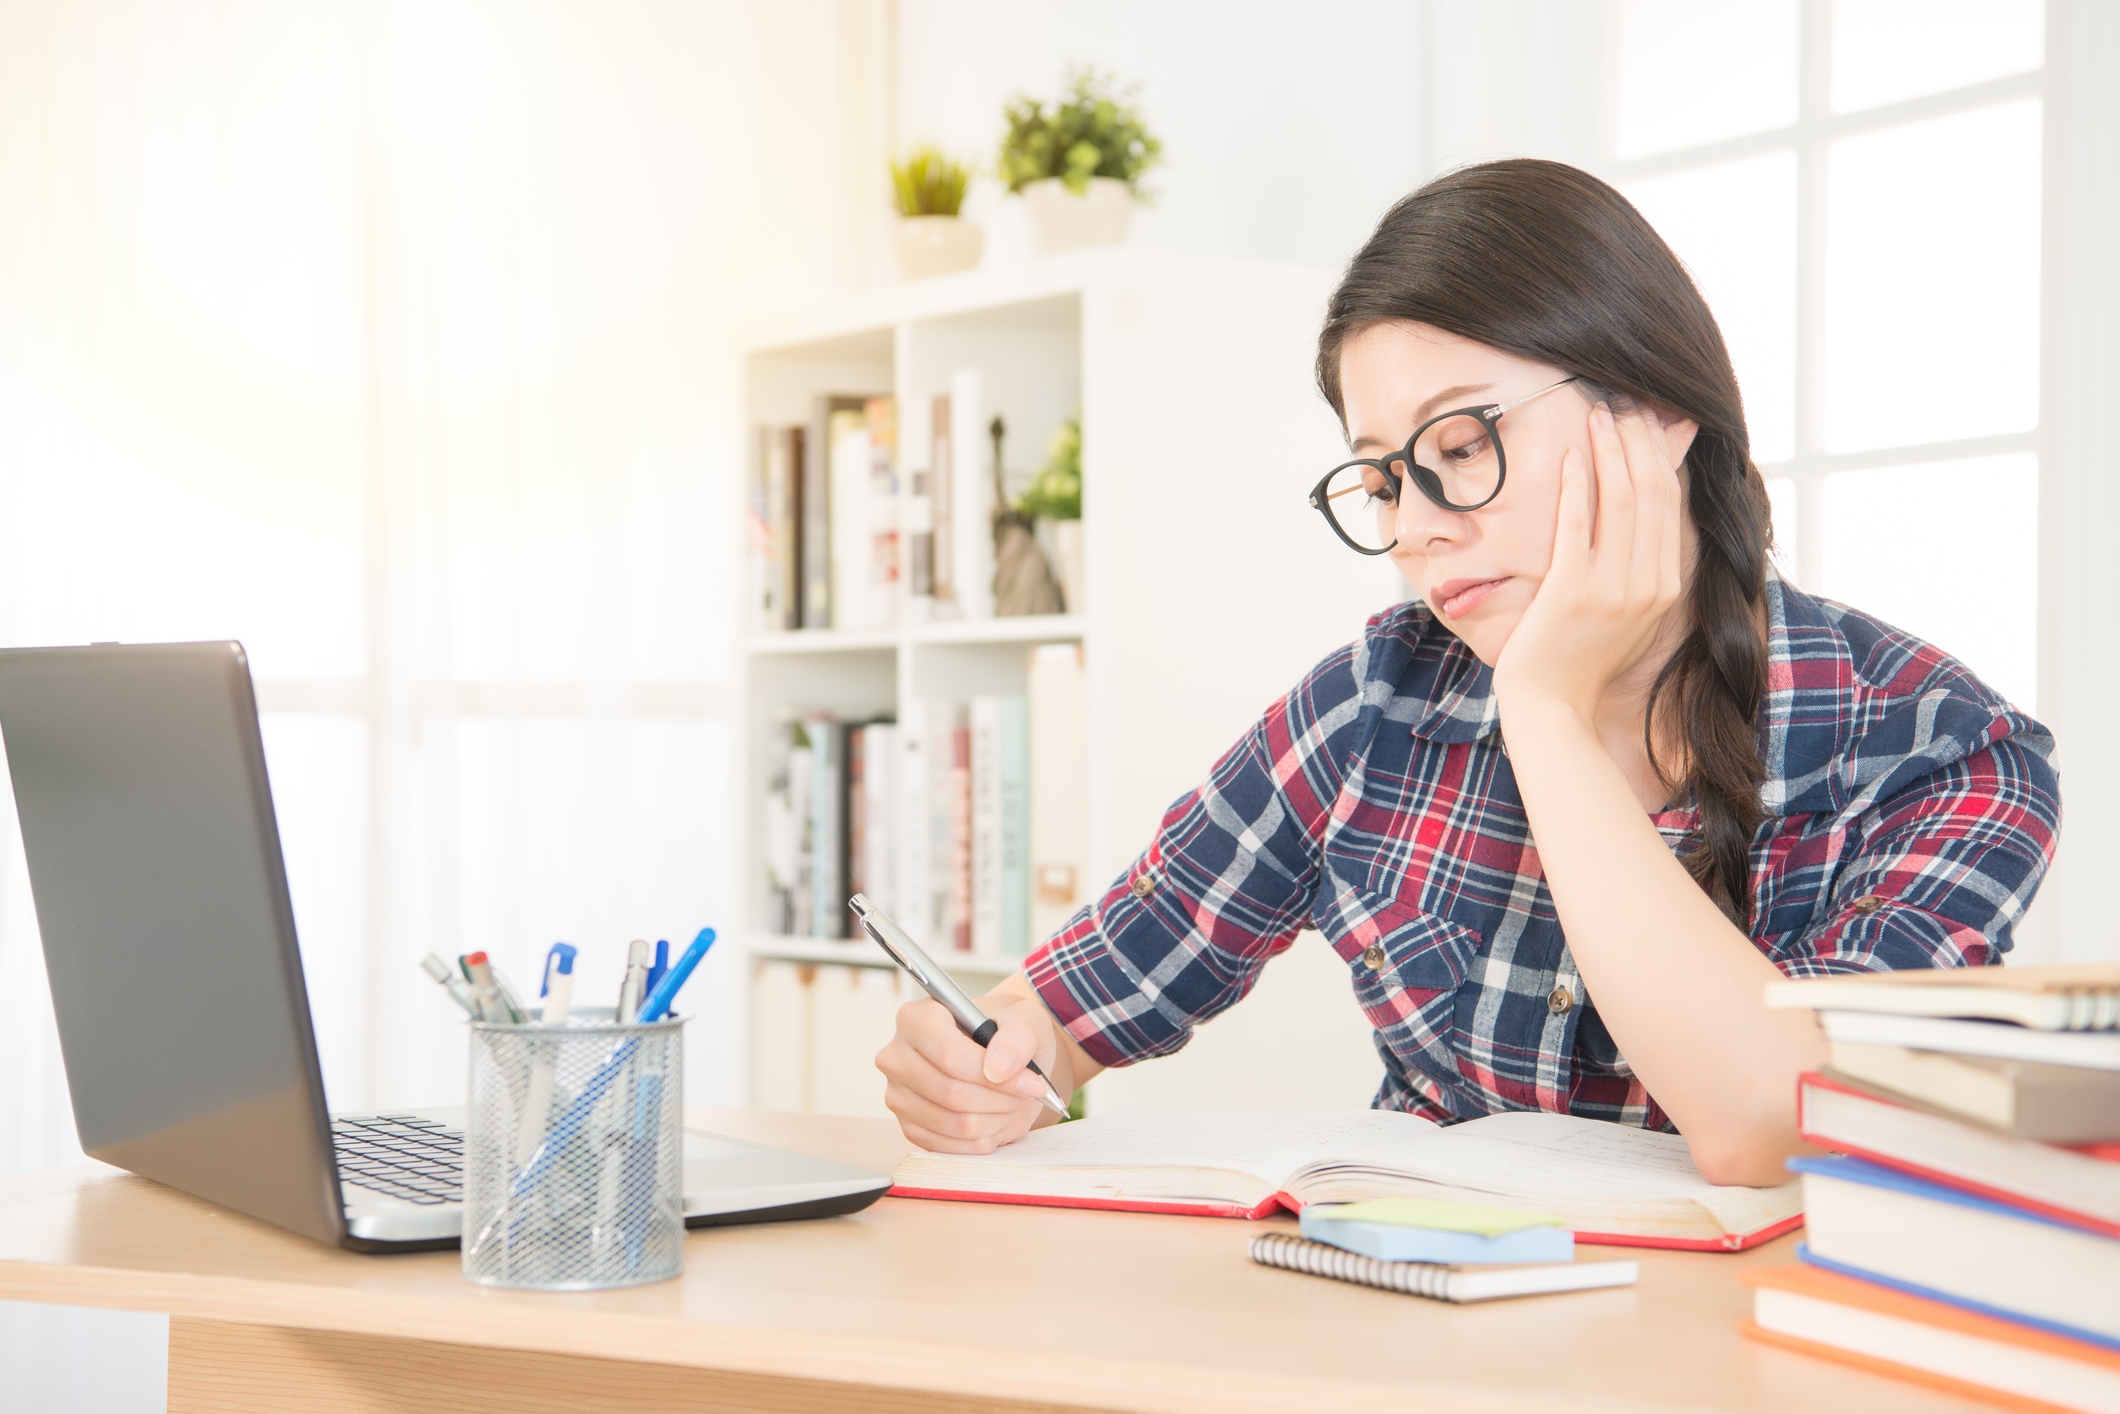 Need Help in Essay Writing – Our Top Tips Can Guide You Best